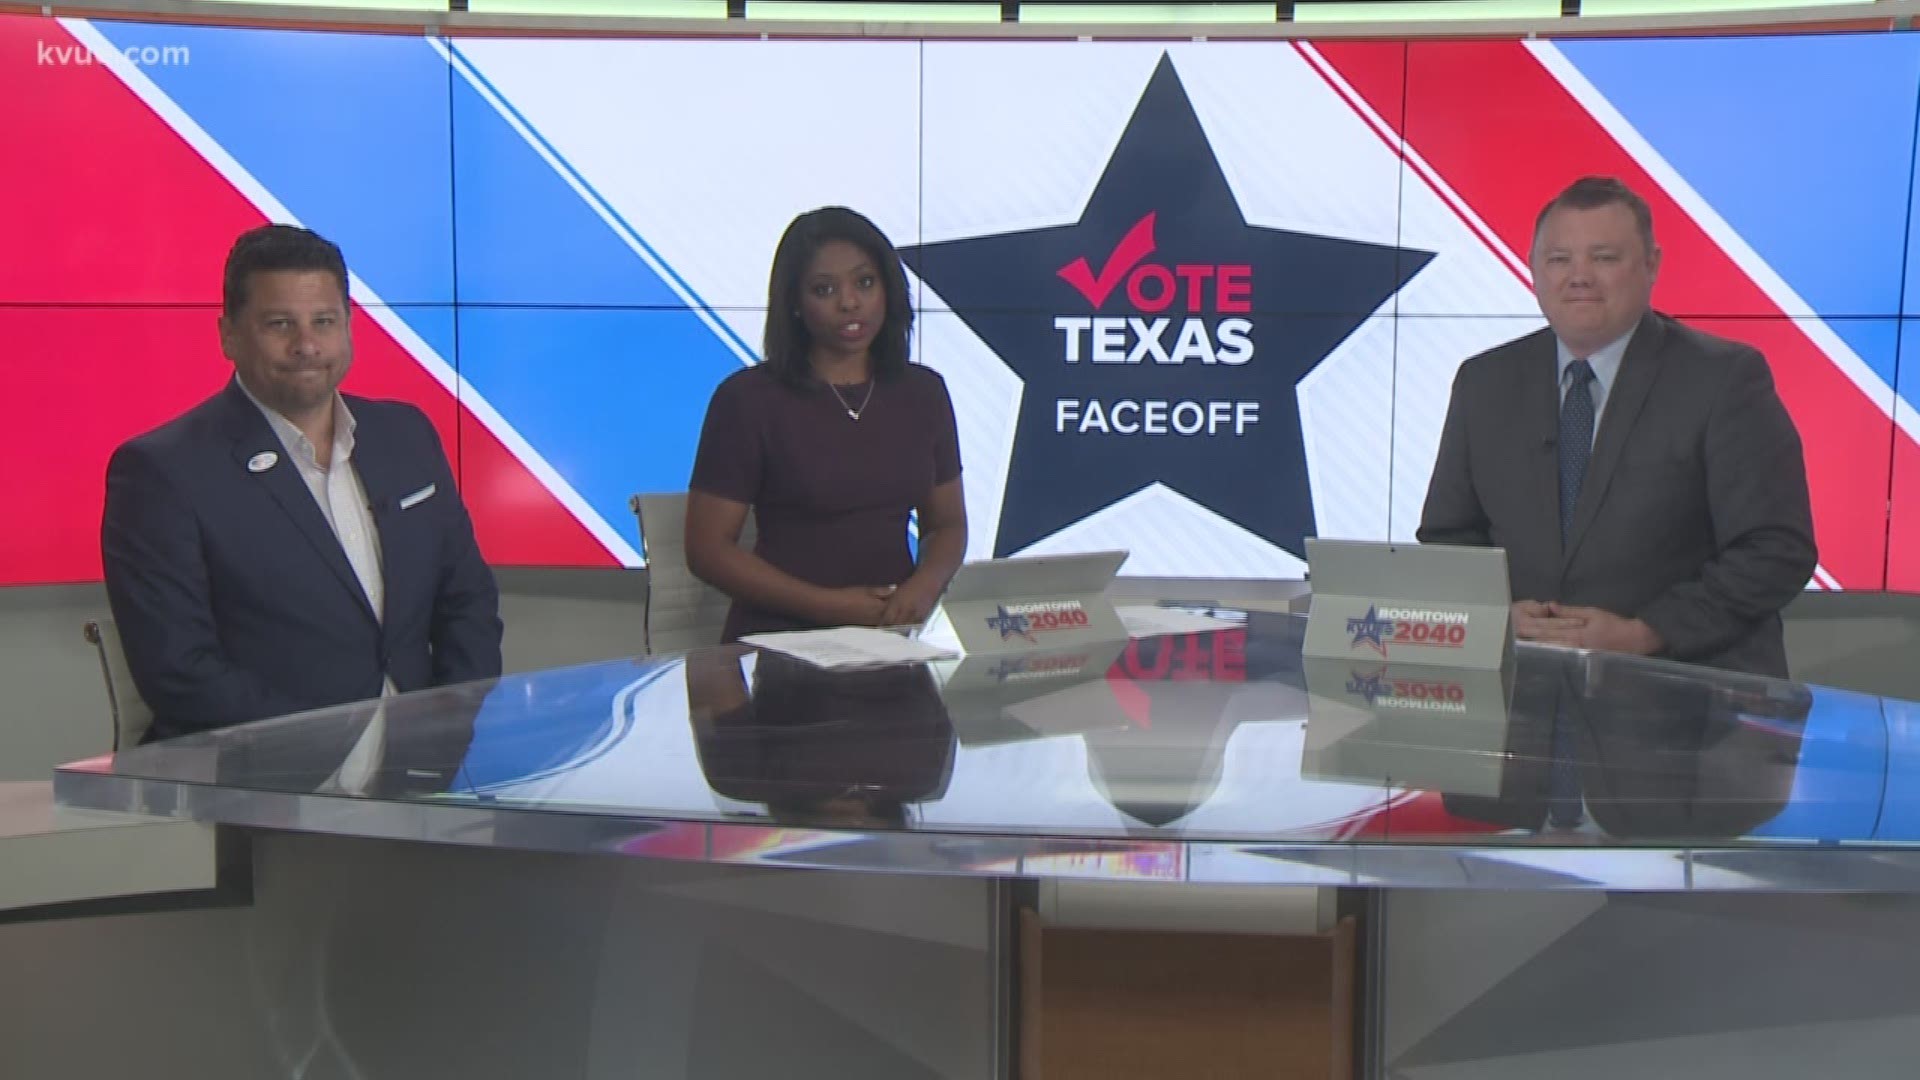 It’s time for our weekly political segment called Texas Face Off. Joining KVUE is Progress Texas Executive Director Ed Espinoza and Matt Mackowiak, who is the chairman of the Travis County Republican Party. They discuss the Russia investigation, the possibility of Trump being impeached and MJ Hegar's run against John Cornyn for a Senate seat.